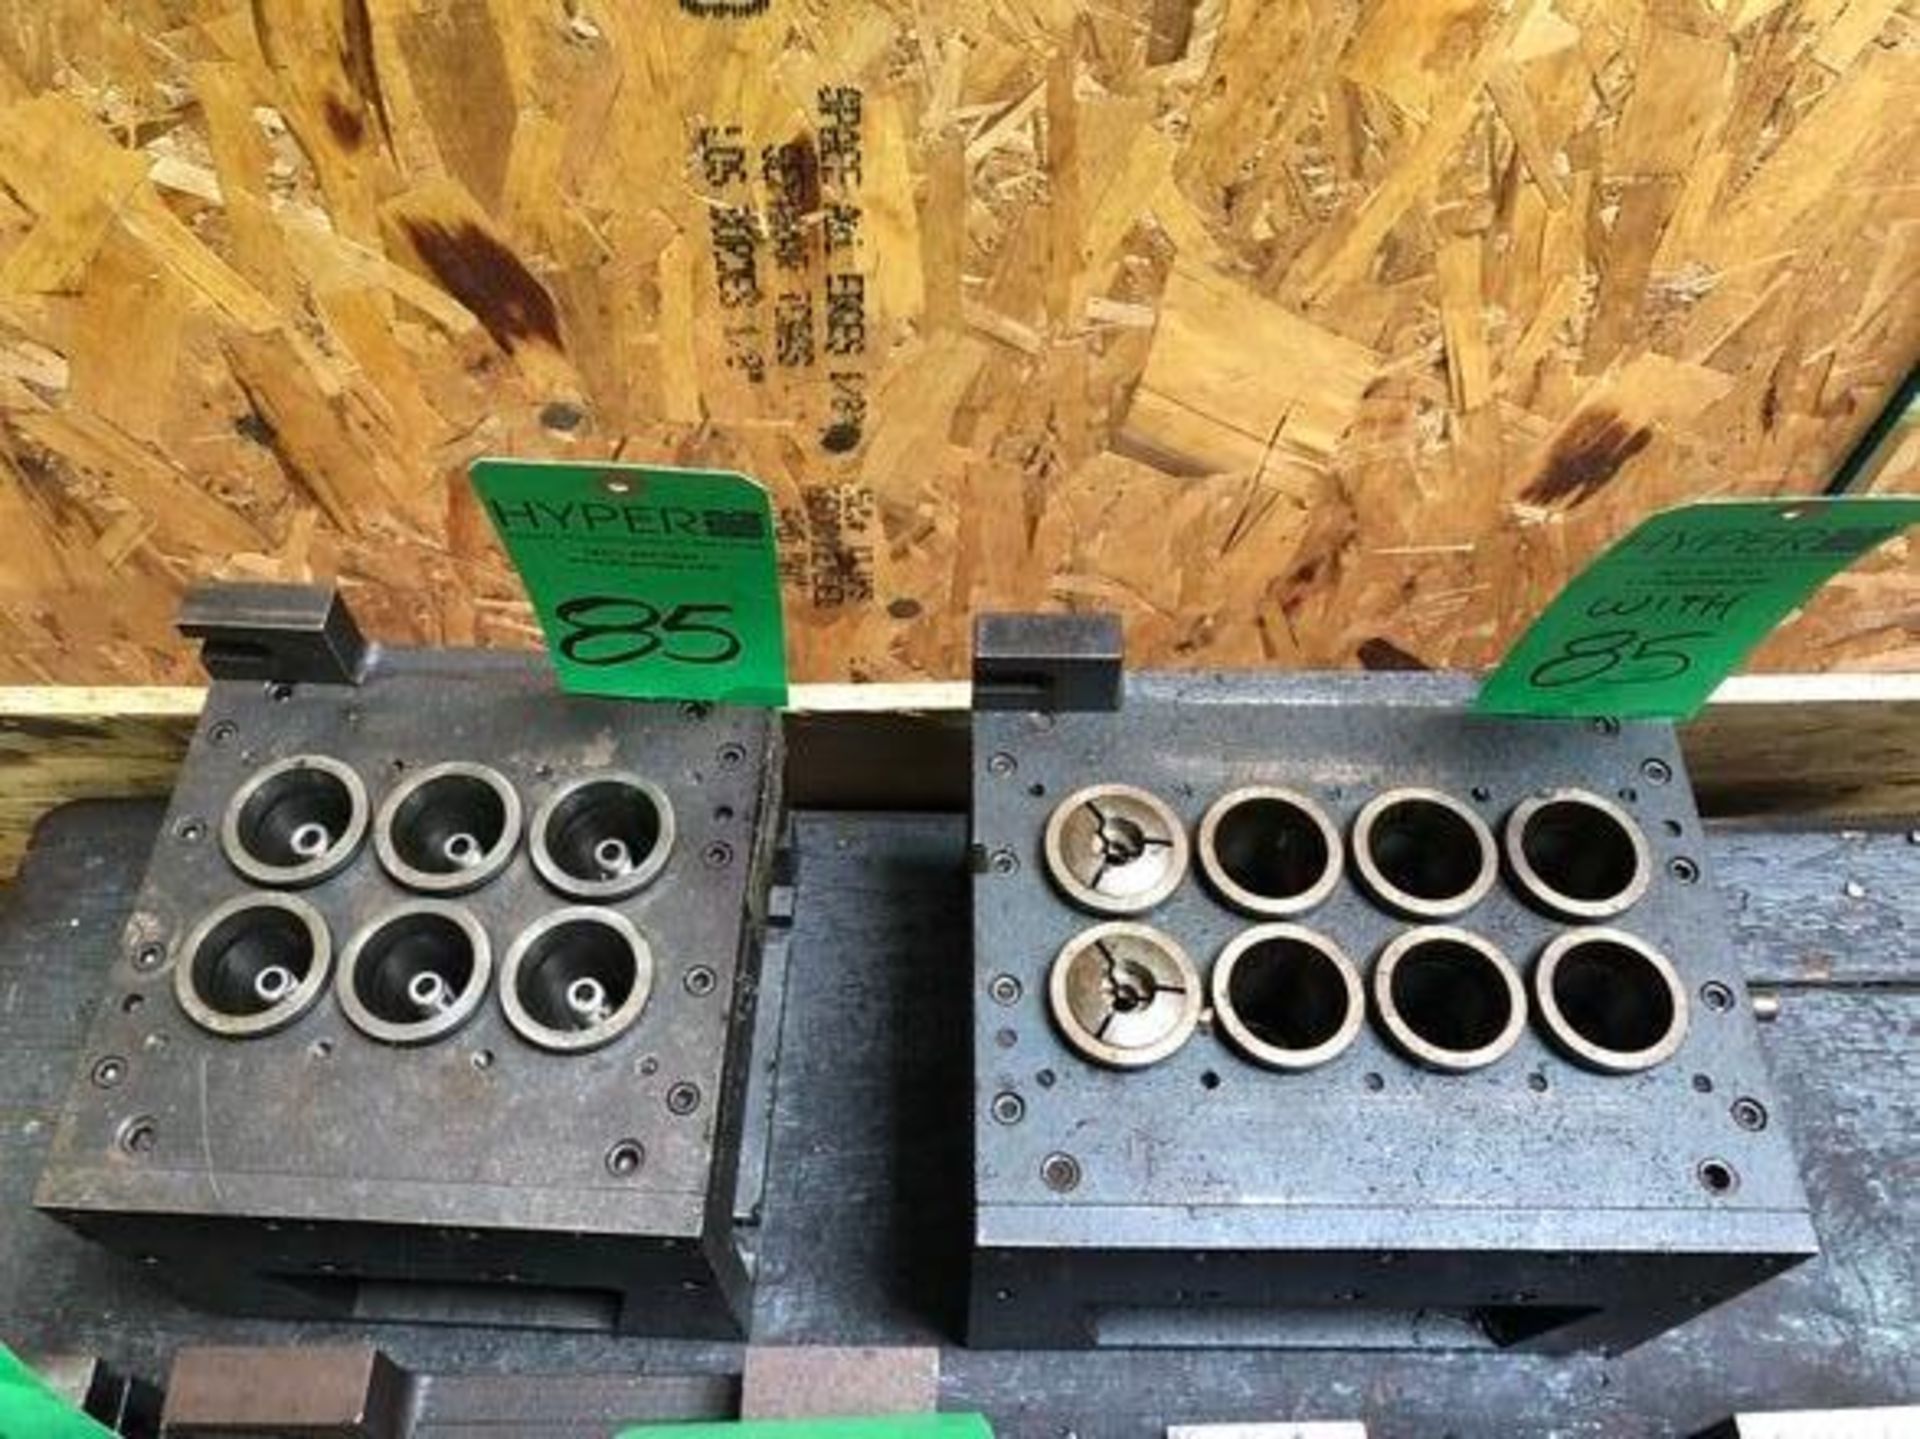 2 Beere Collect Uniform Fixture to include 1ea 6 Collet and 1ea 8 Collet fixture